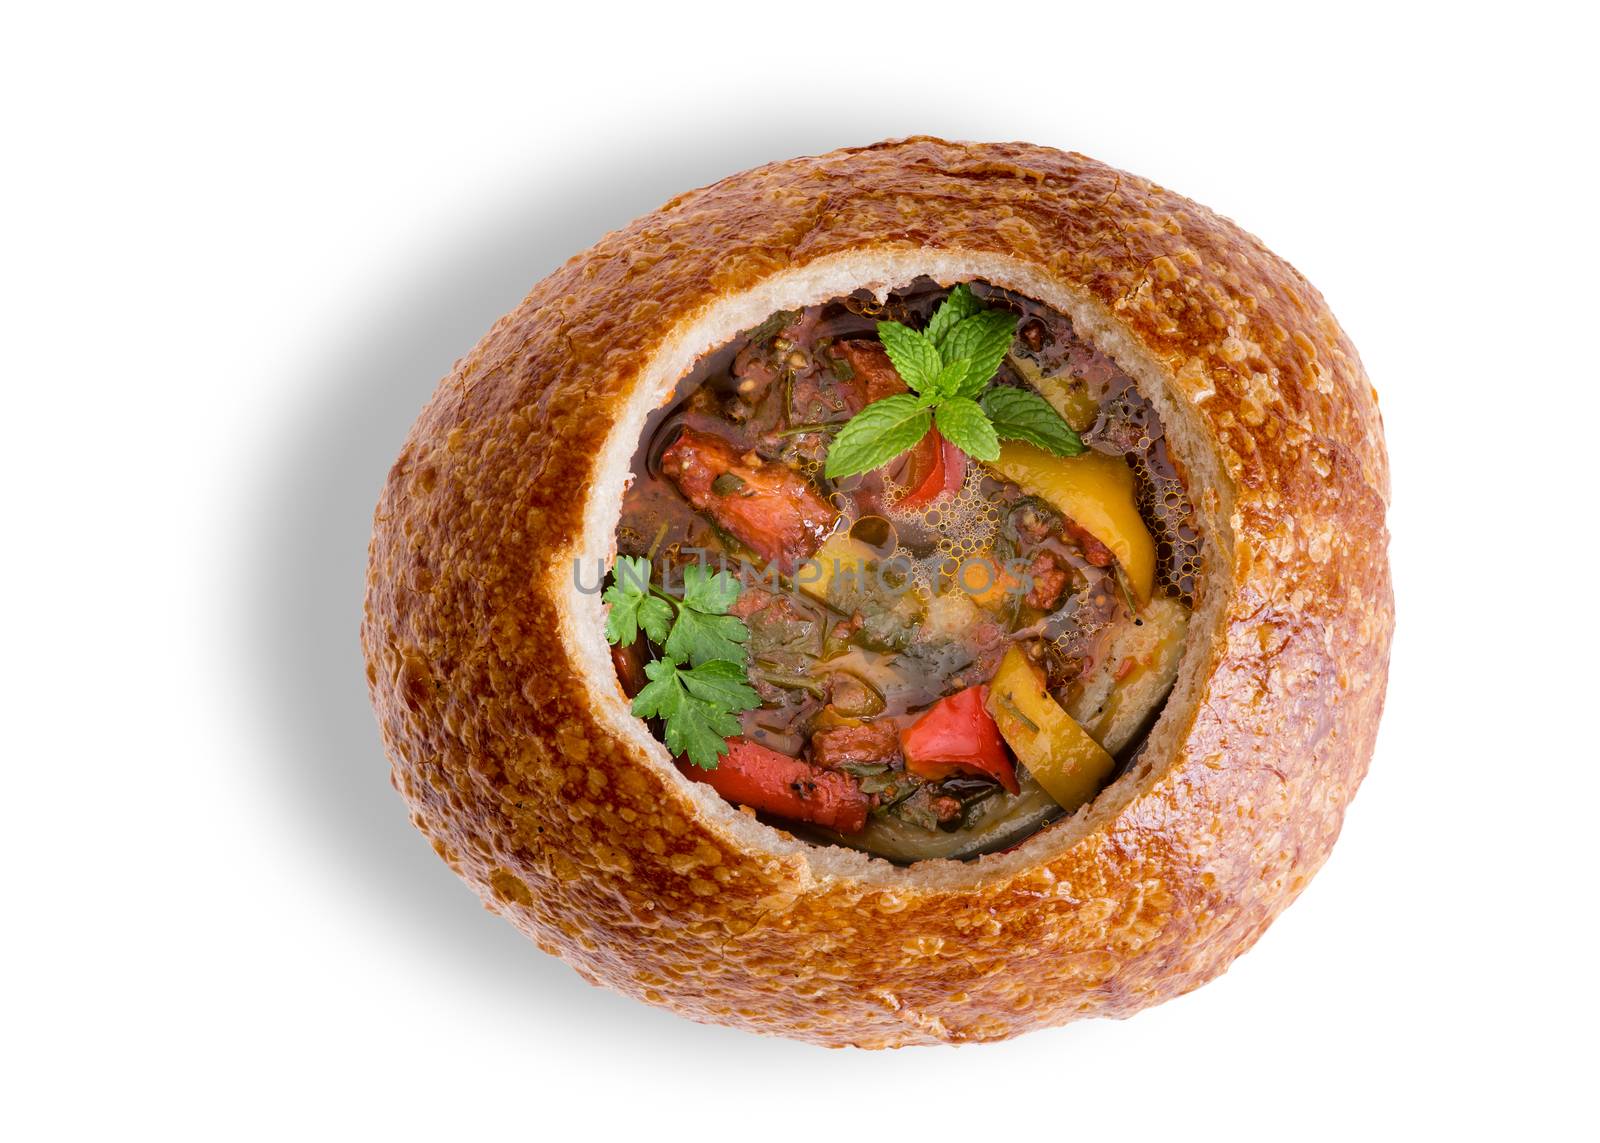 Wholesome vegetable soup with eggplant, brinjal or aubergine, in a sourdough bread bowl garnished with fresh parsely and mint viewed from above over a white background